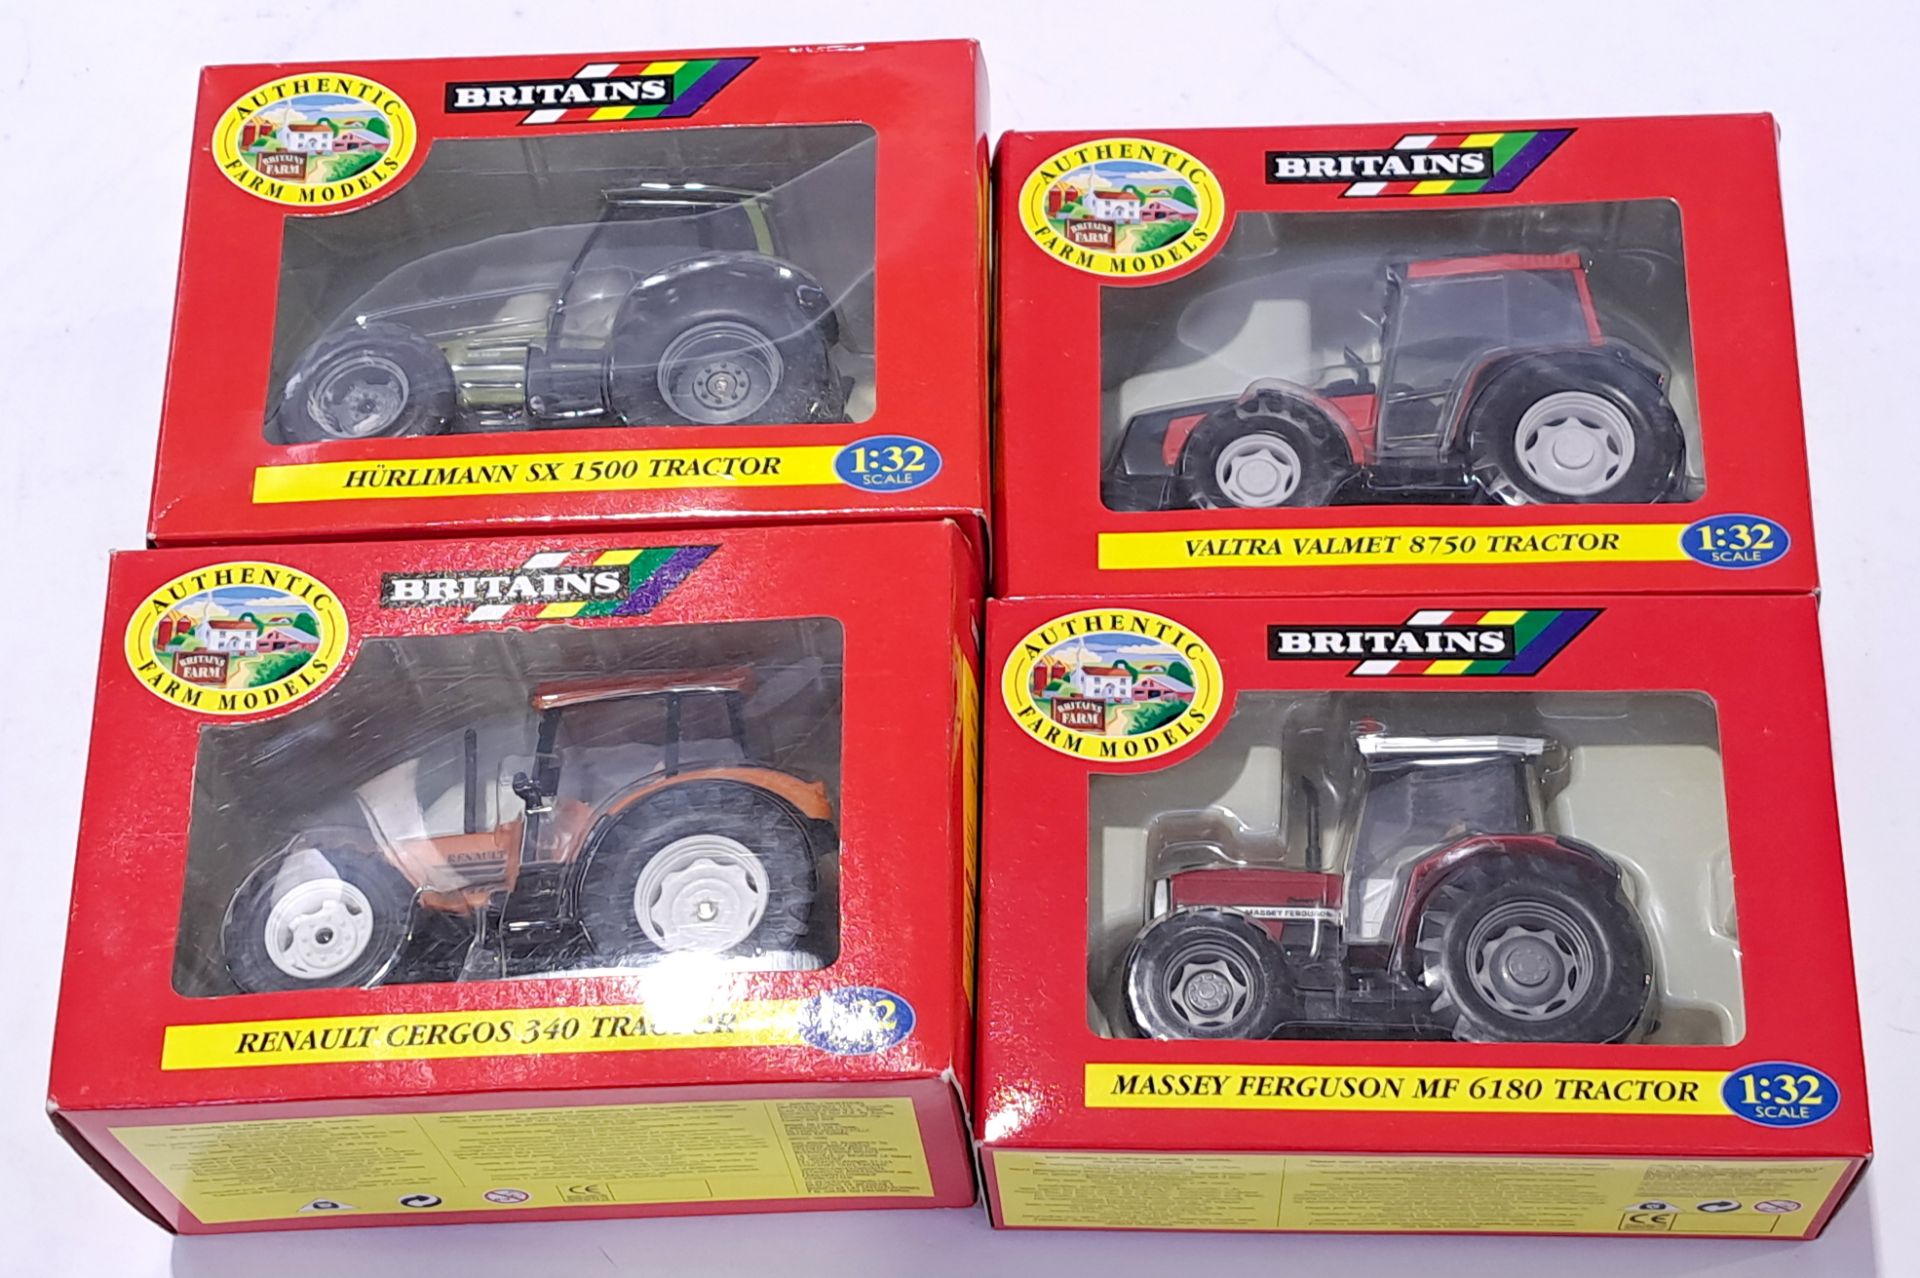 Britains Tractors 00225, 00038, 09439 and 9491 a boxed group. Not checked for completion or corre...